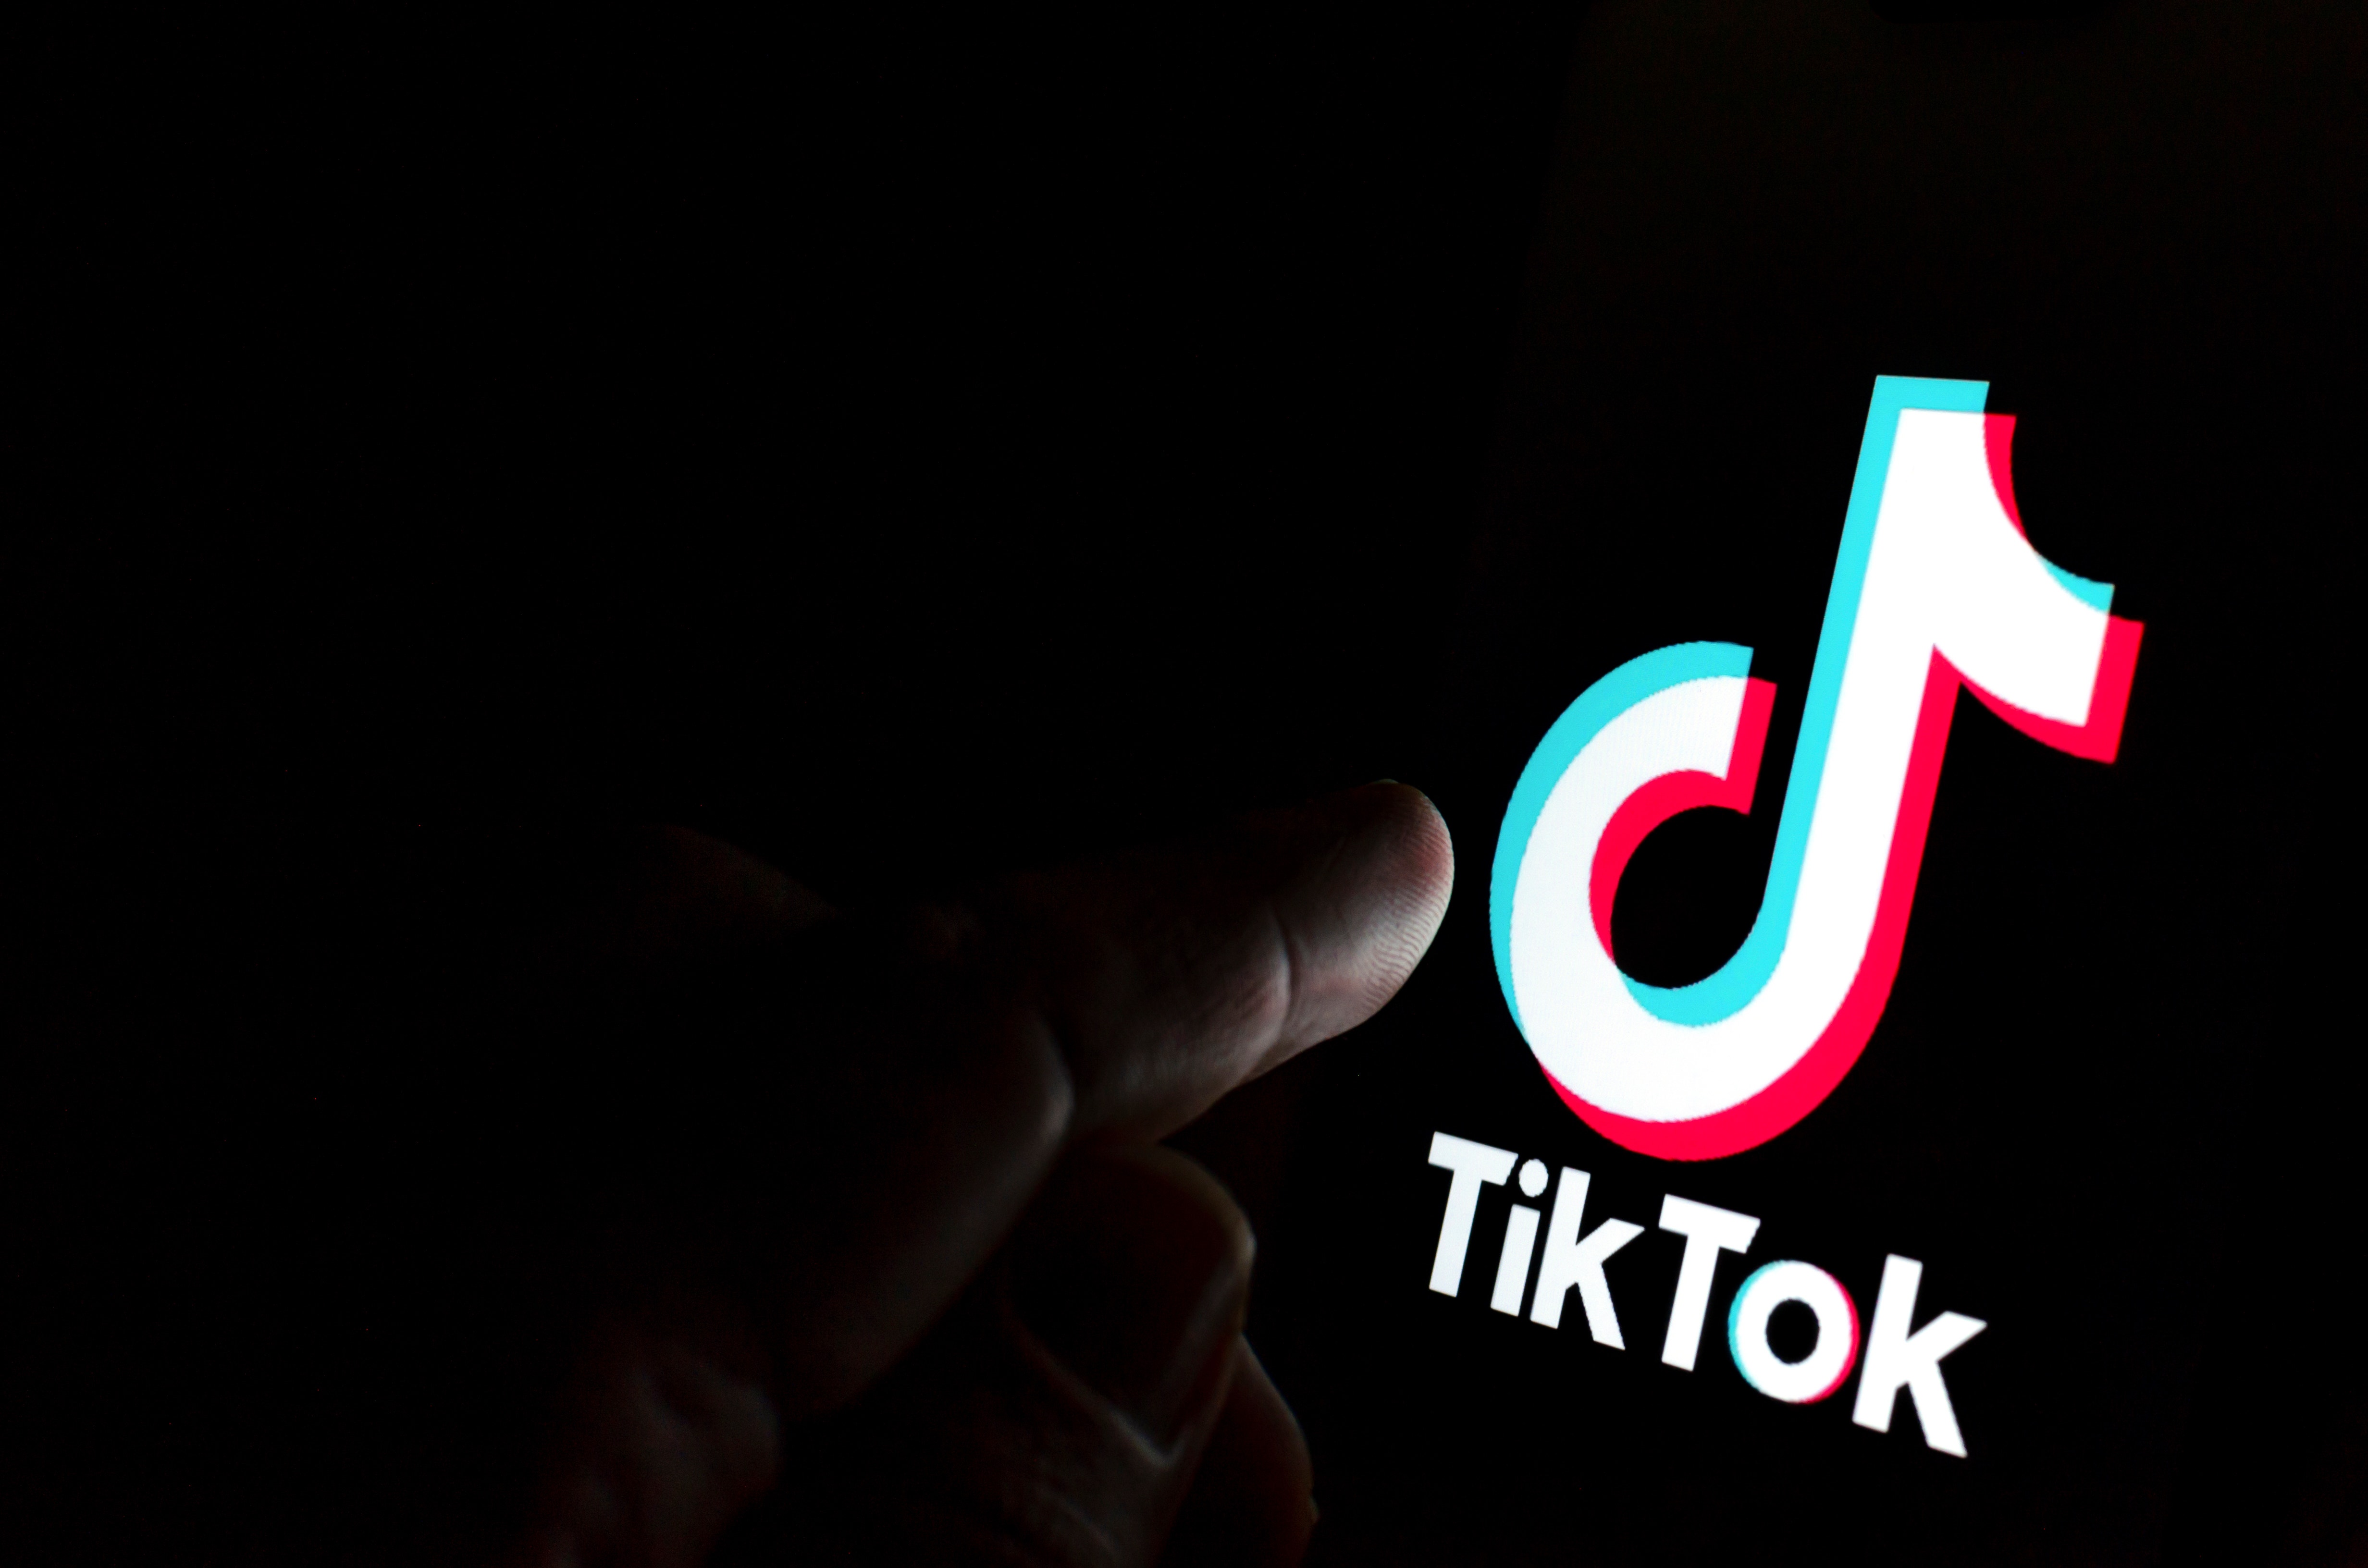 As TikTok Moves To Rival Google In Search, Research Flags Concerns Over Spreading Misinformation